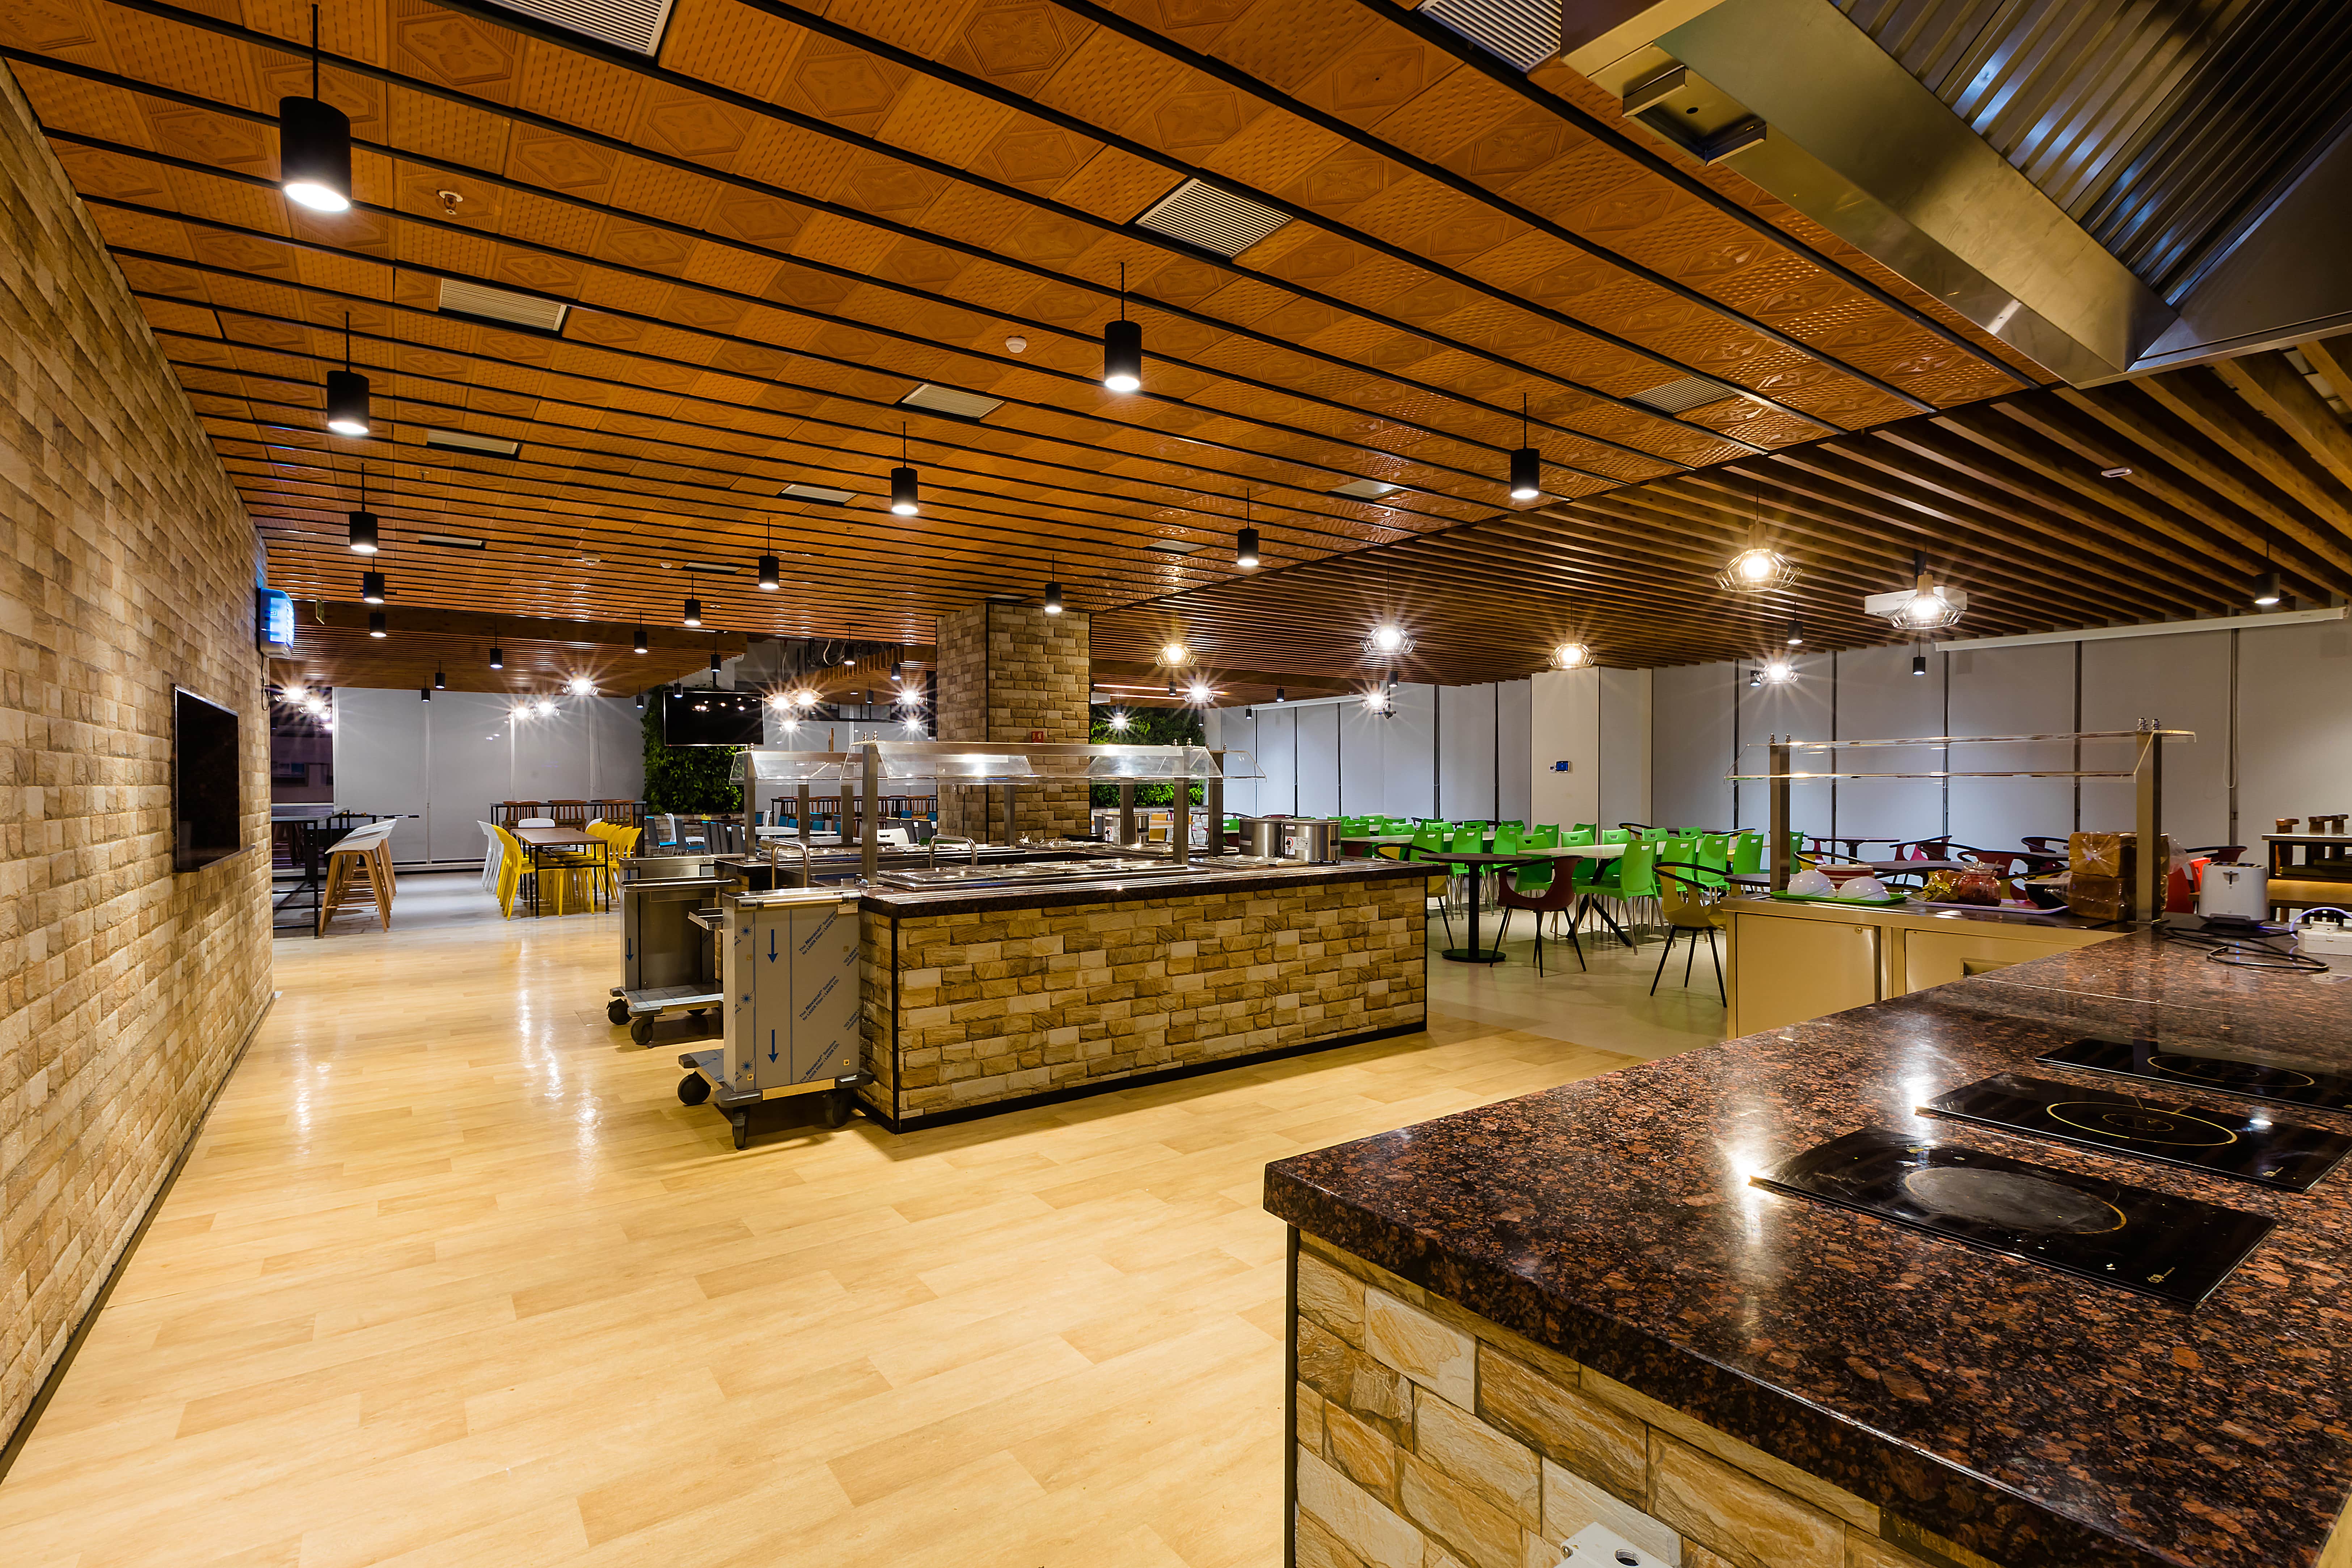 Workplace design and pantry details are meant to promote healthy eating choices